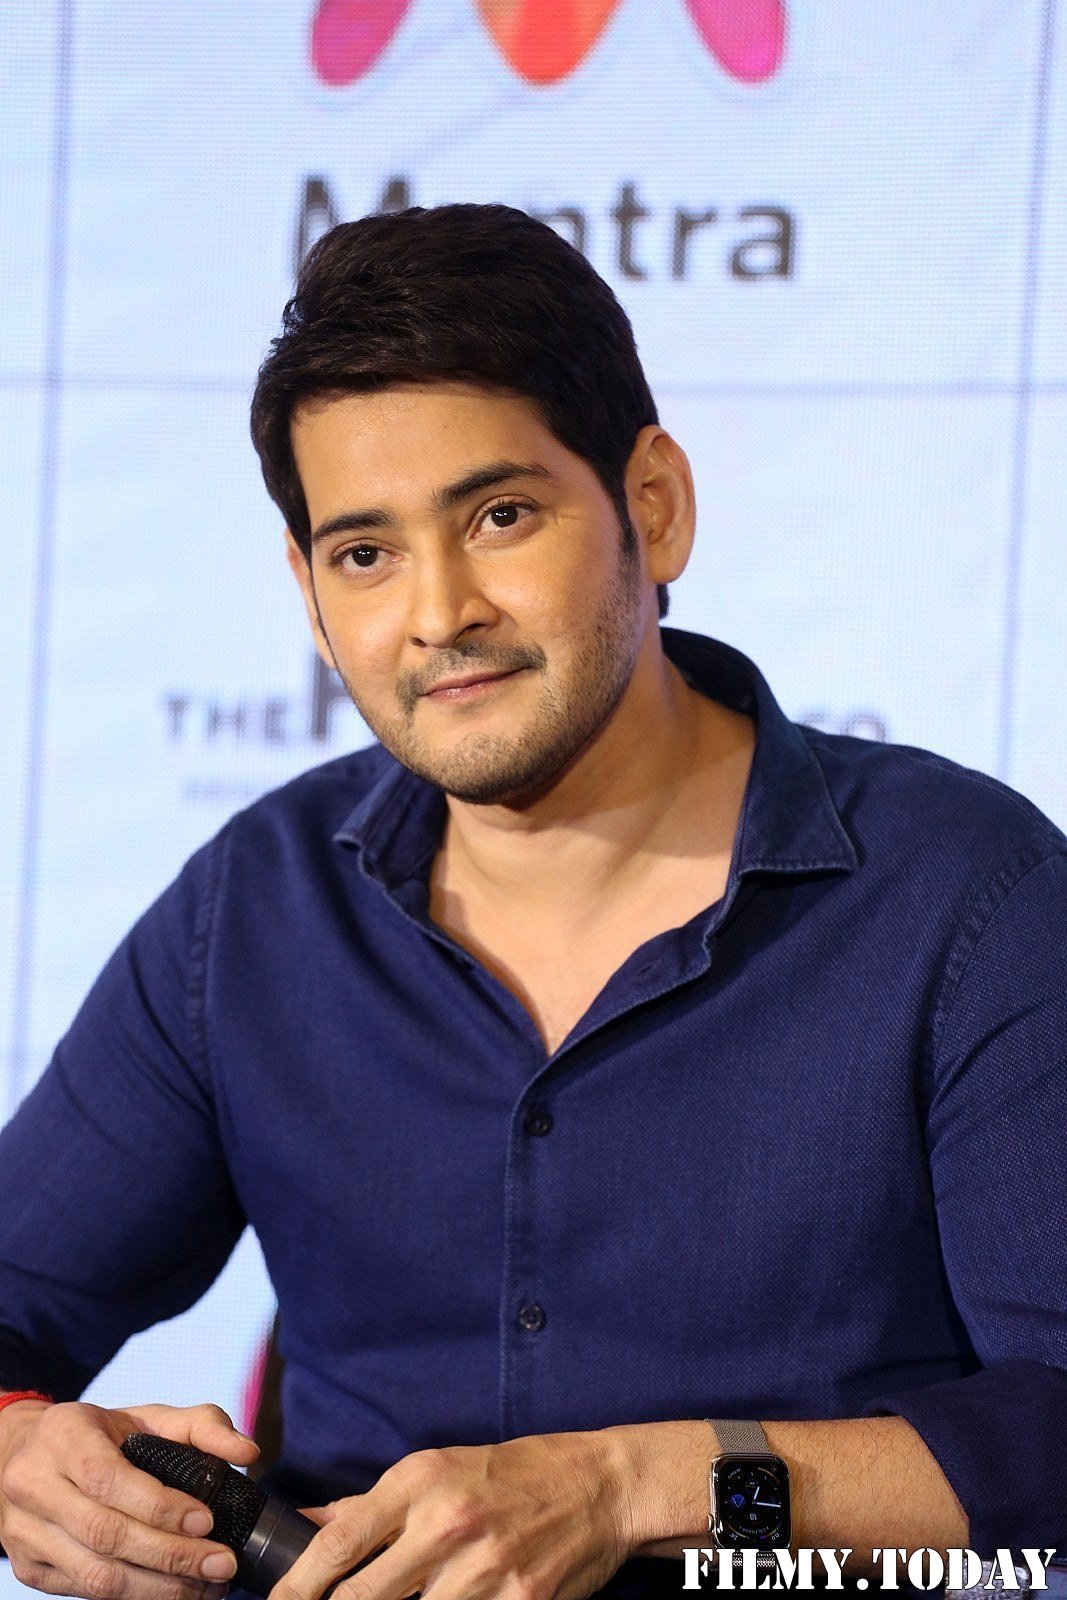 Mahesh Babu Launches His Apparel Brand The Humbl Co On Myntra Photos | Picture 1715423